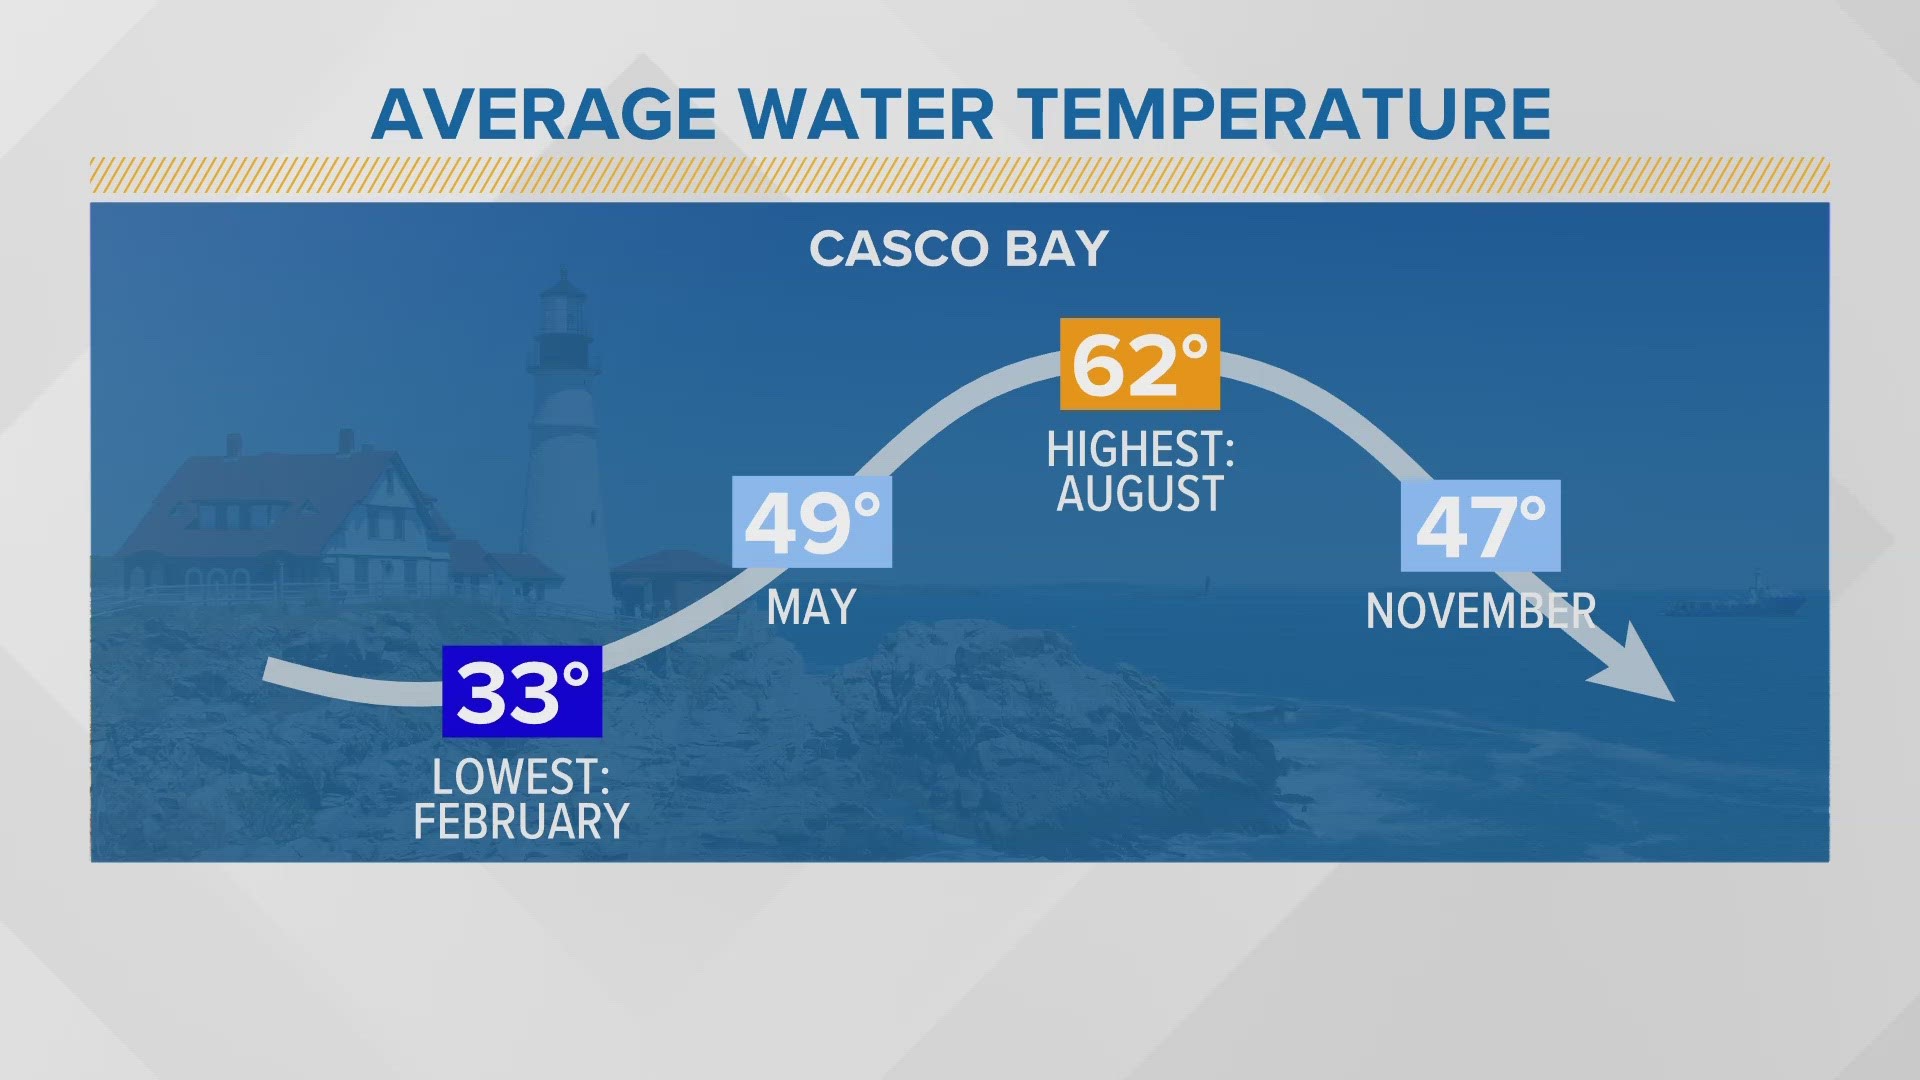 Air temperatures are getting warmer as water temperatures struggle to keep up.